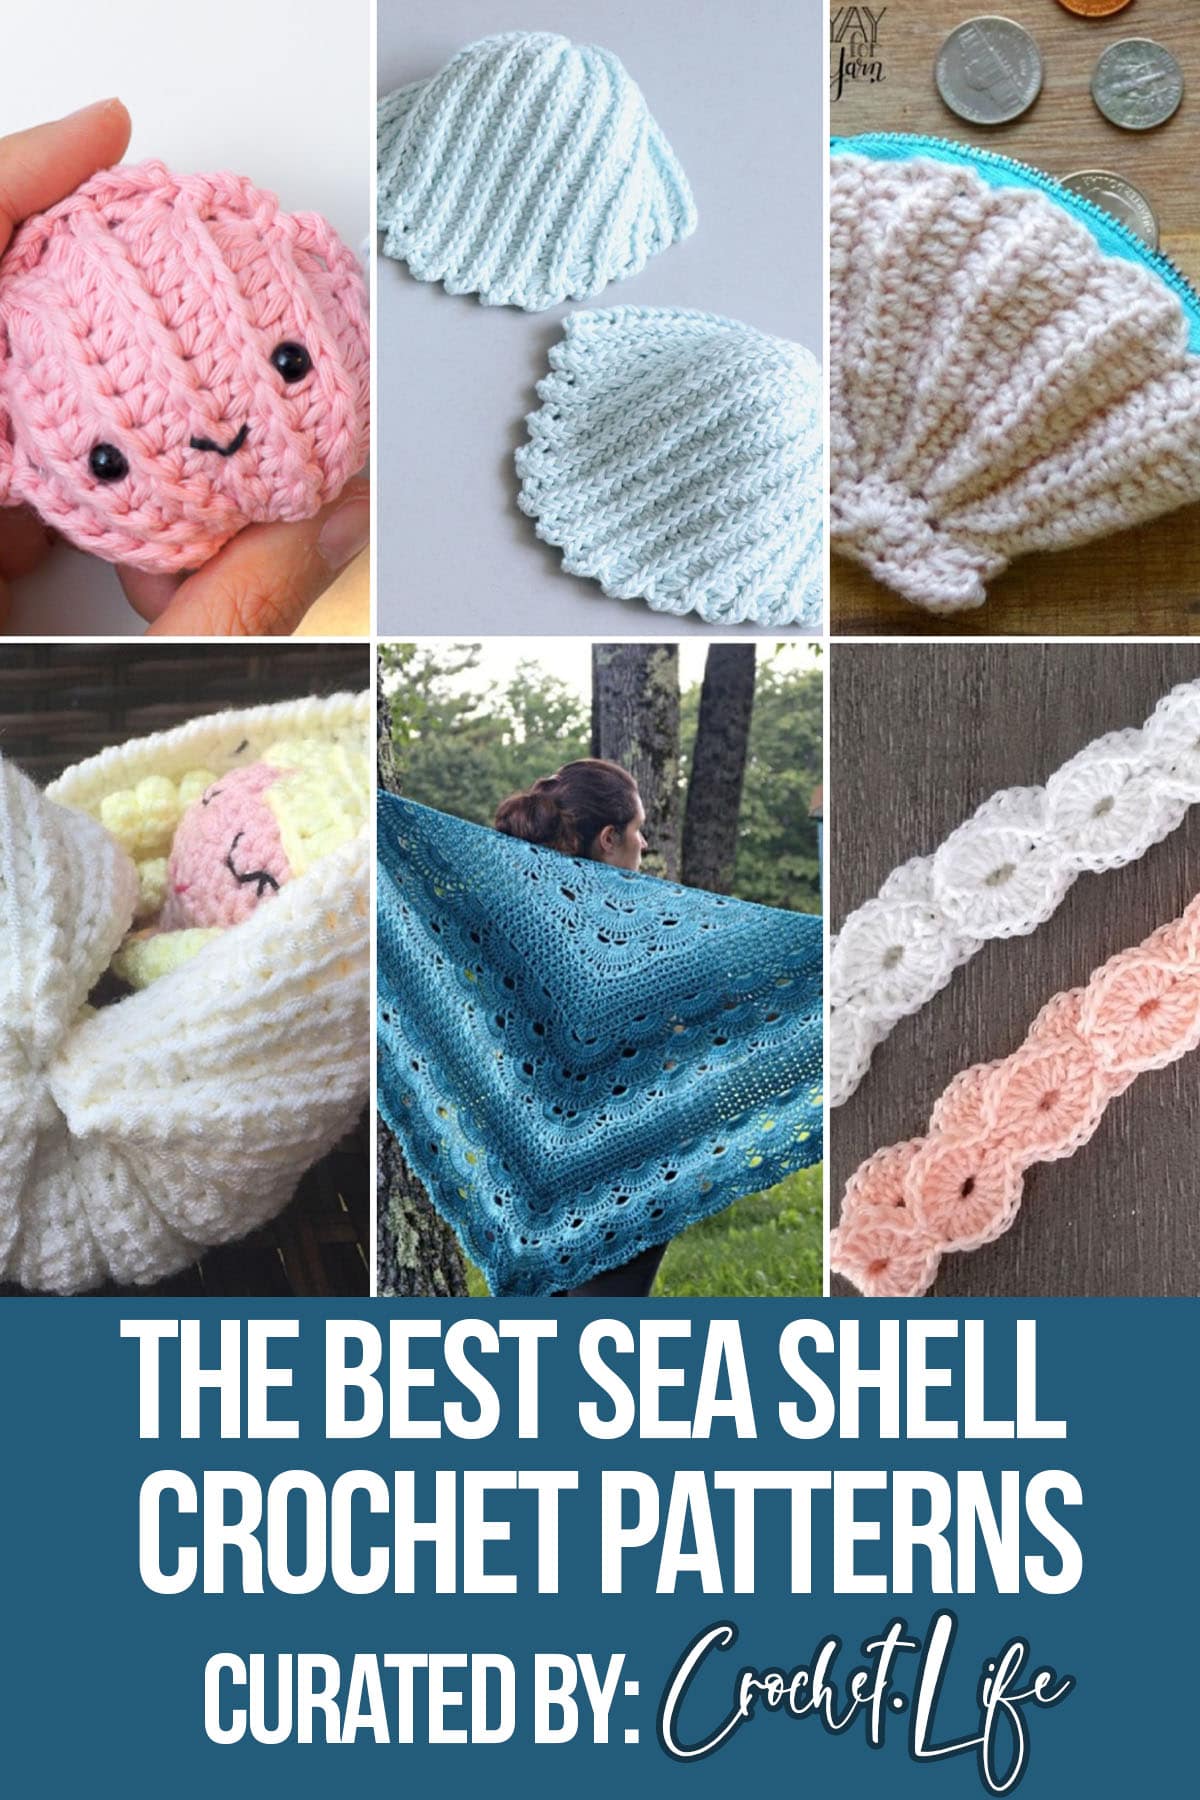 photo collage of beach crochet patterns with text which reads the best sea shell crochet patterns curated by crochet.life